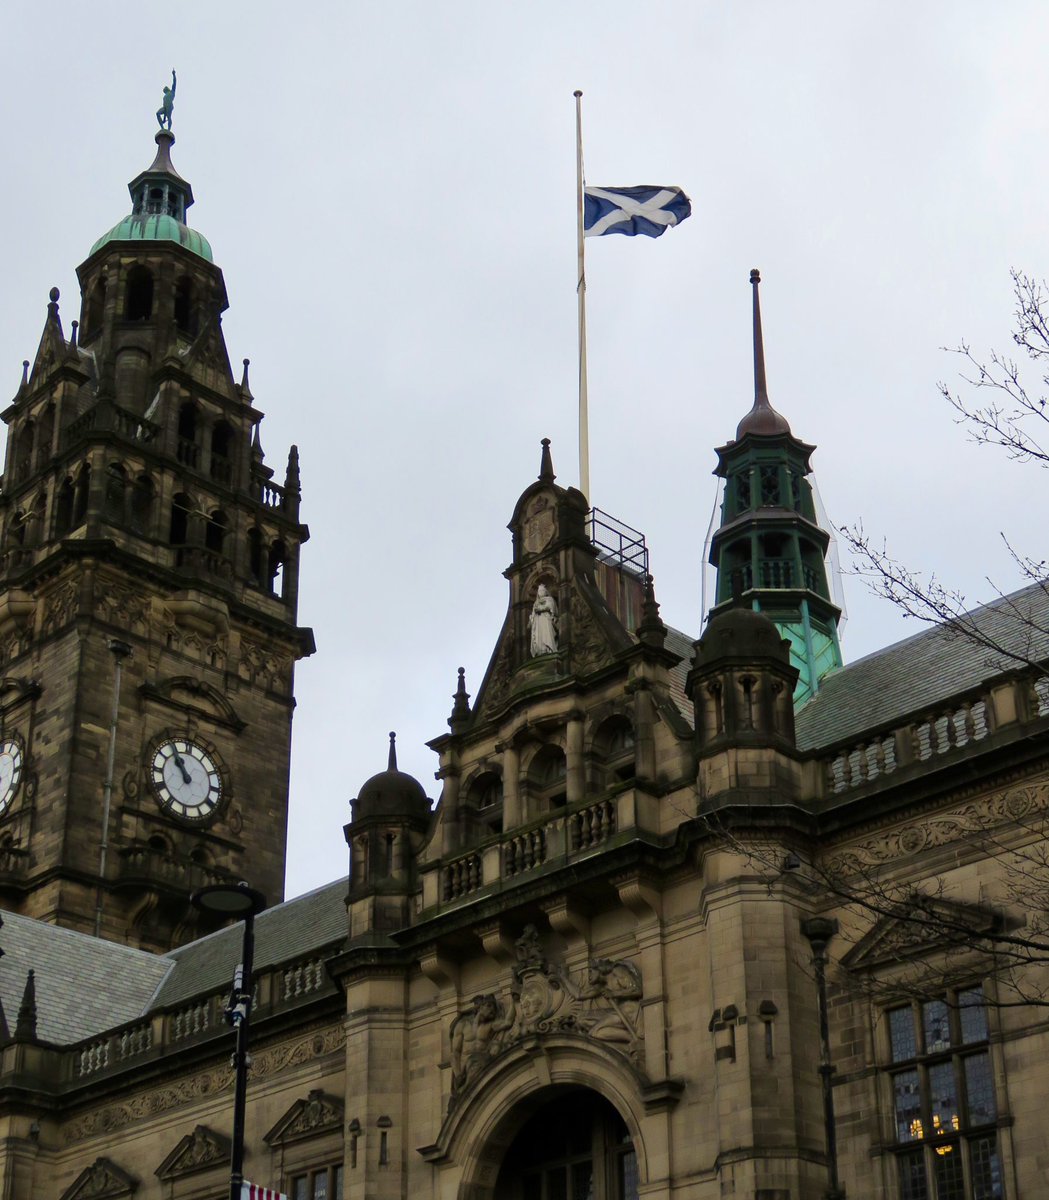 Sheffield City Council made a massive blunder yesterday, raising the wrong flag for St. David's Day! 

Here's the story of what happened @ShefNews: shefnews.co.uk/2023/03/02/she…

Thanks to @steelcitysnaps for some great photography.

#sheffield #sheffieldcitycouncil #StDavidsDay  #news